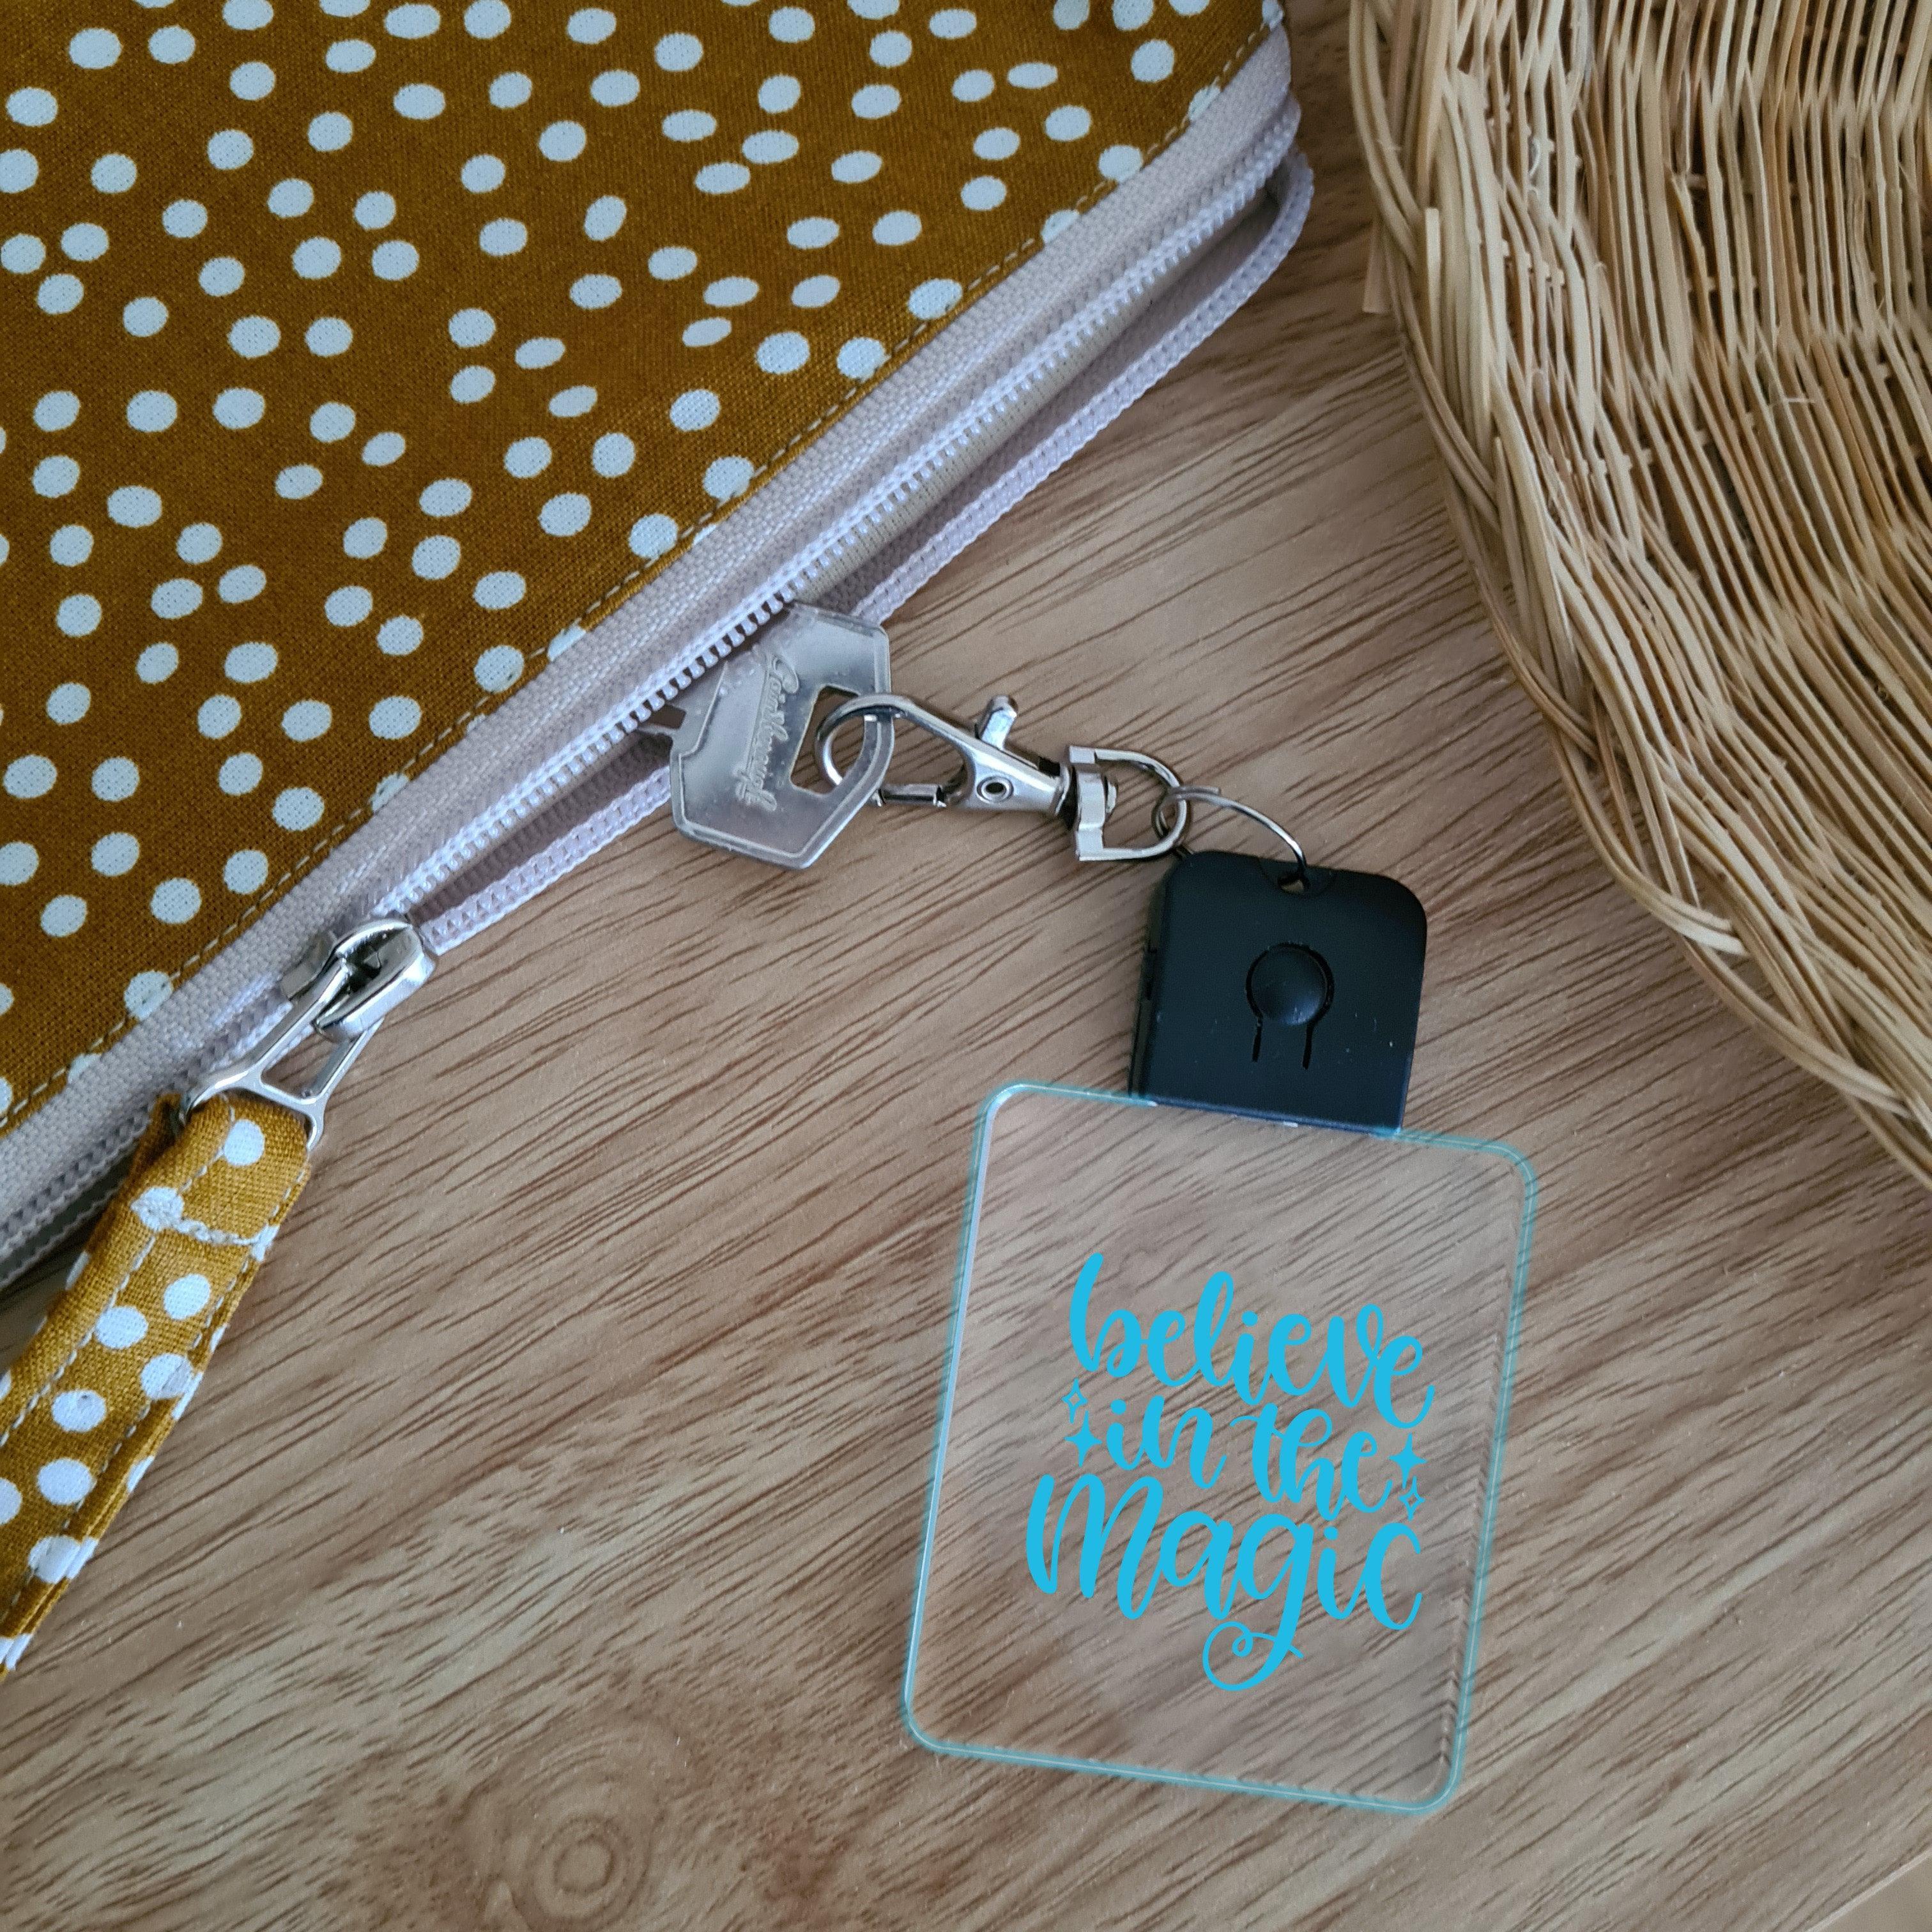 LED Glowing Keychain 🌕 - Believe in the Magic - The Willow Corner